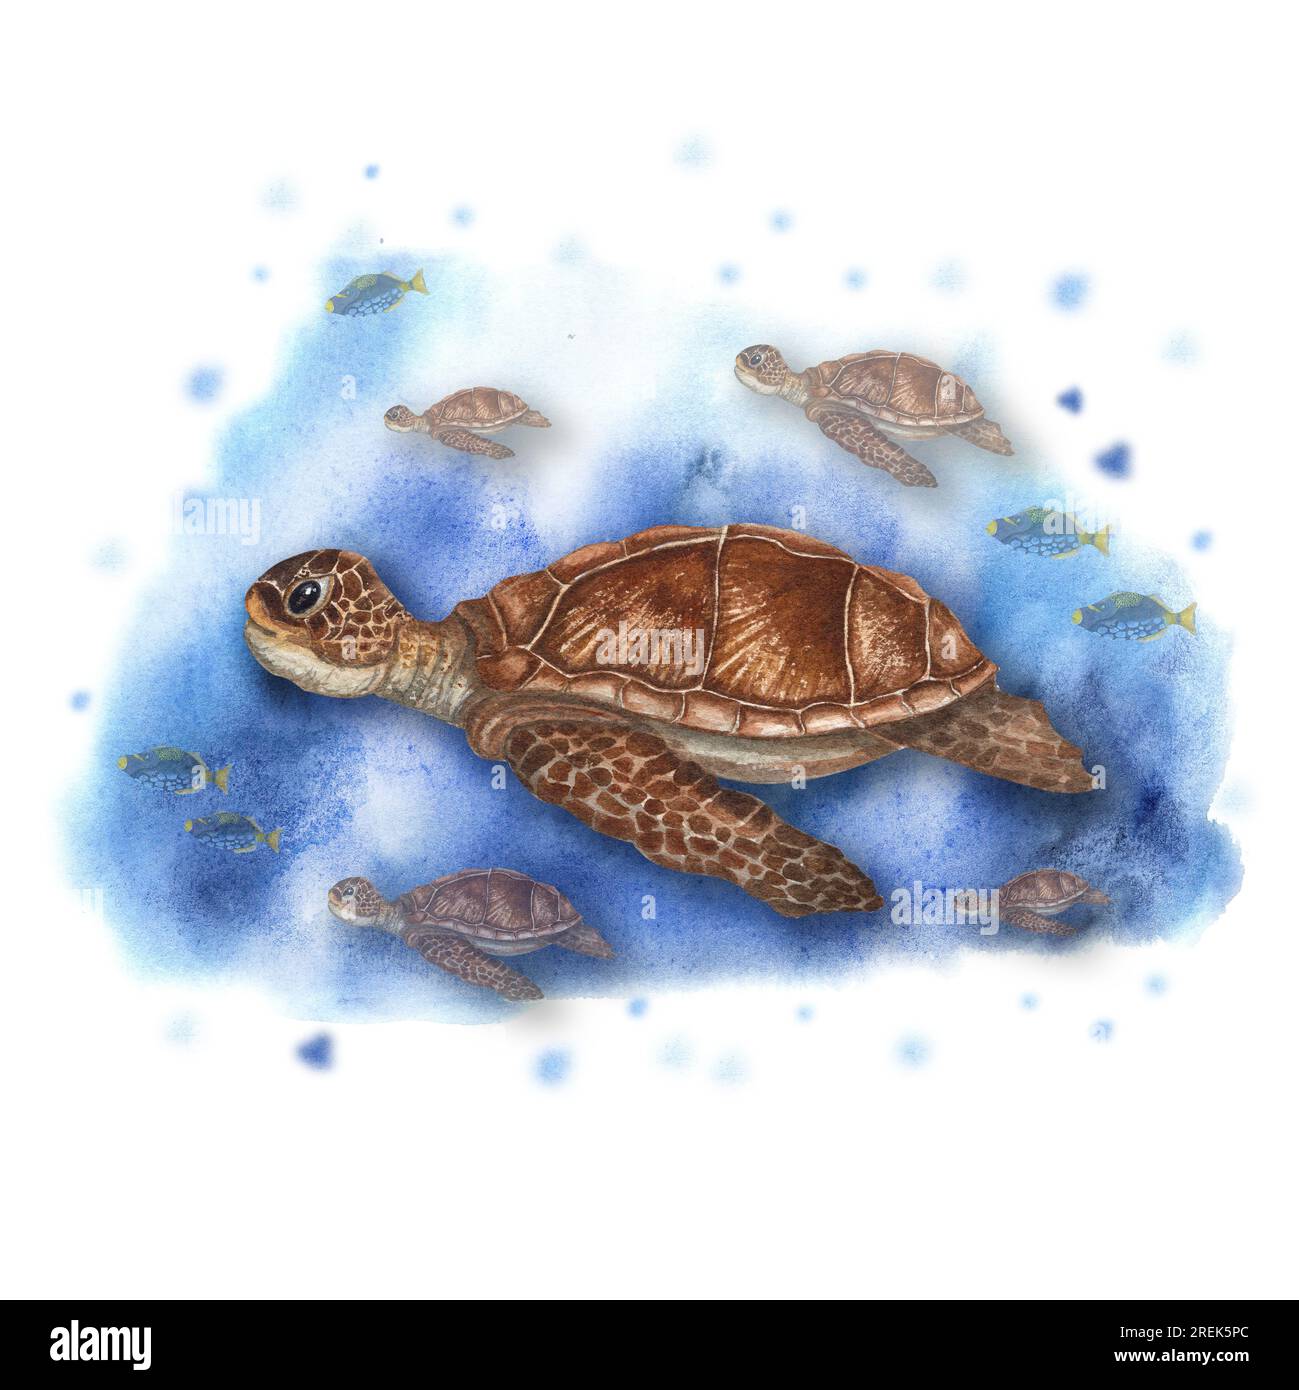 Watercolor illustration with cute sea turtles swimming underwater among fish. Colorful drawing isolated on watercolor background. Stock Photo